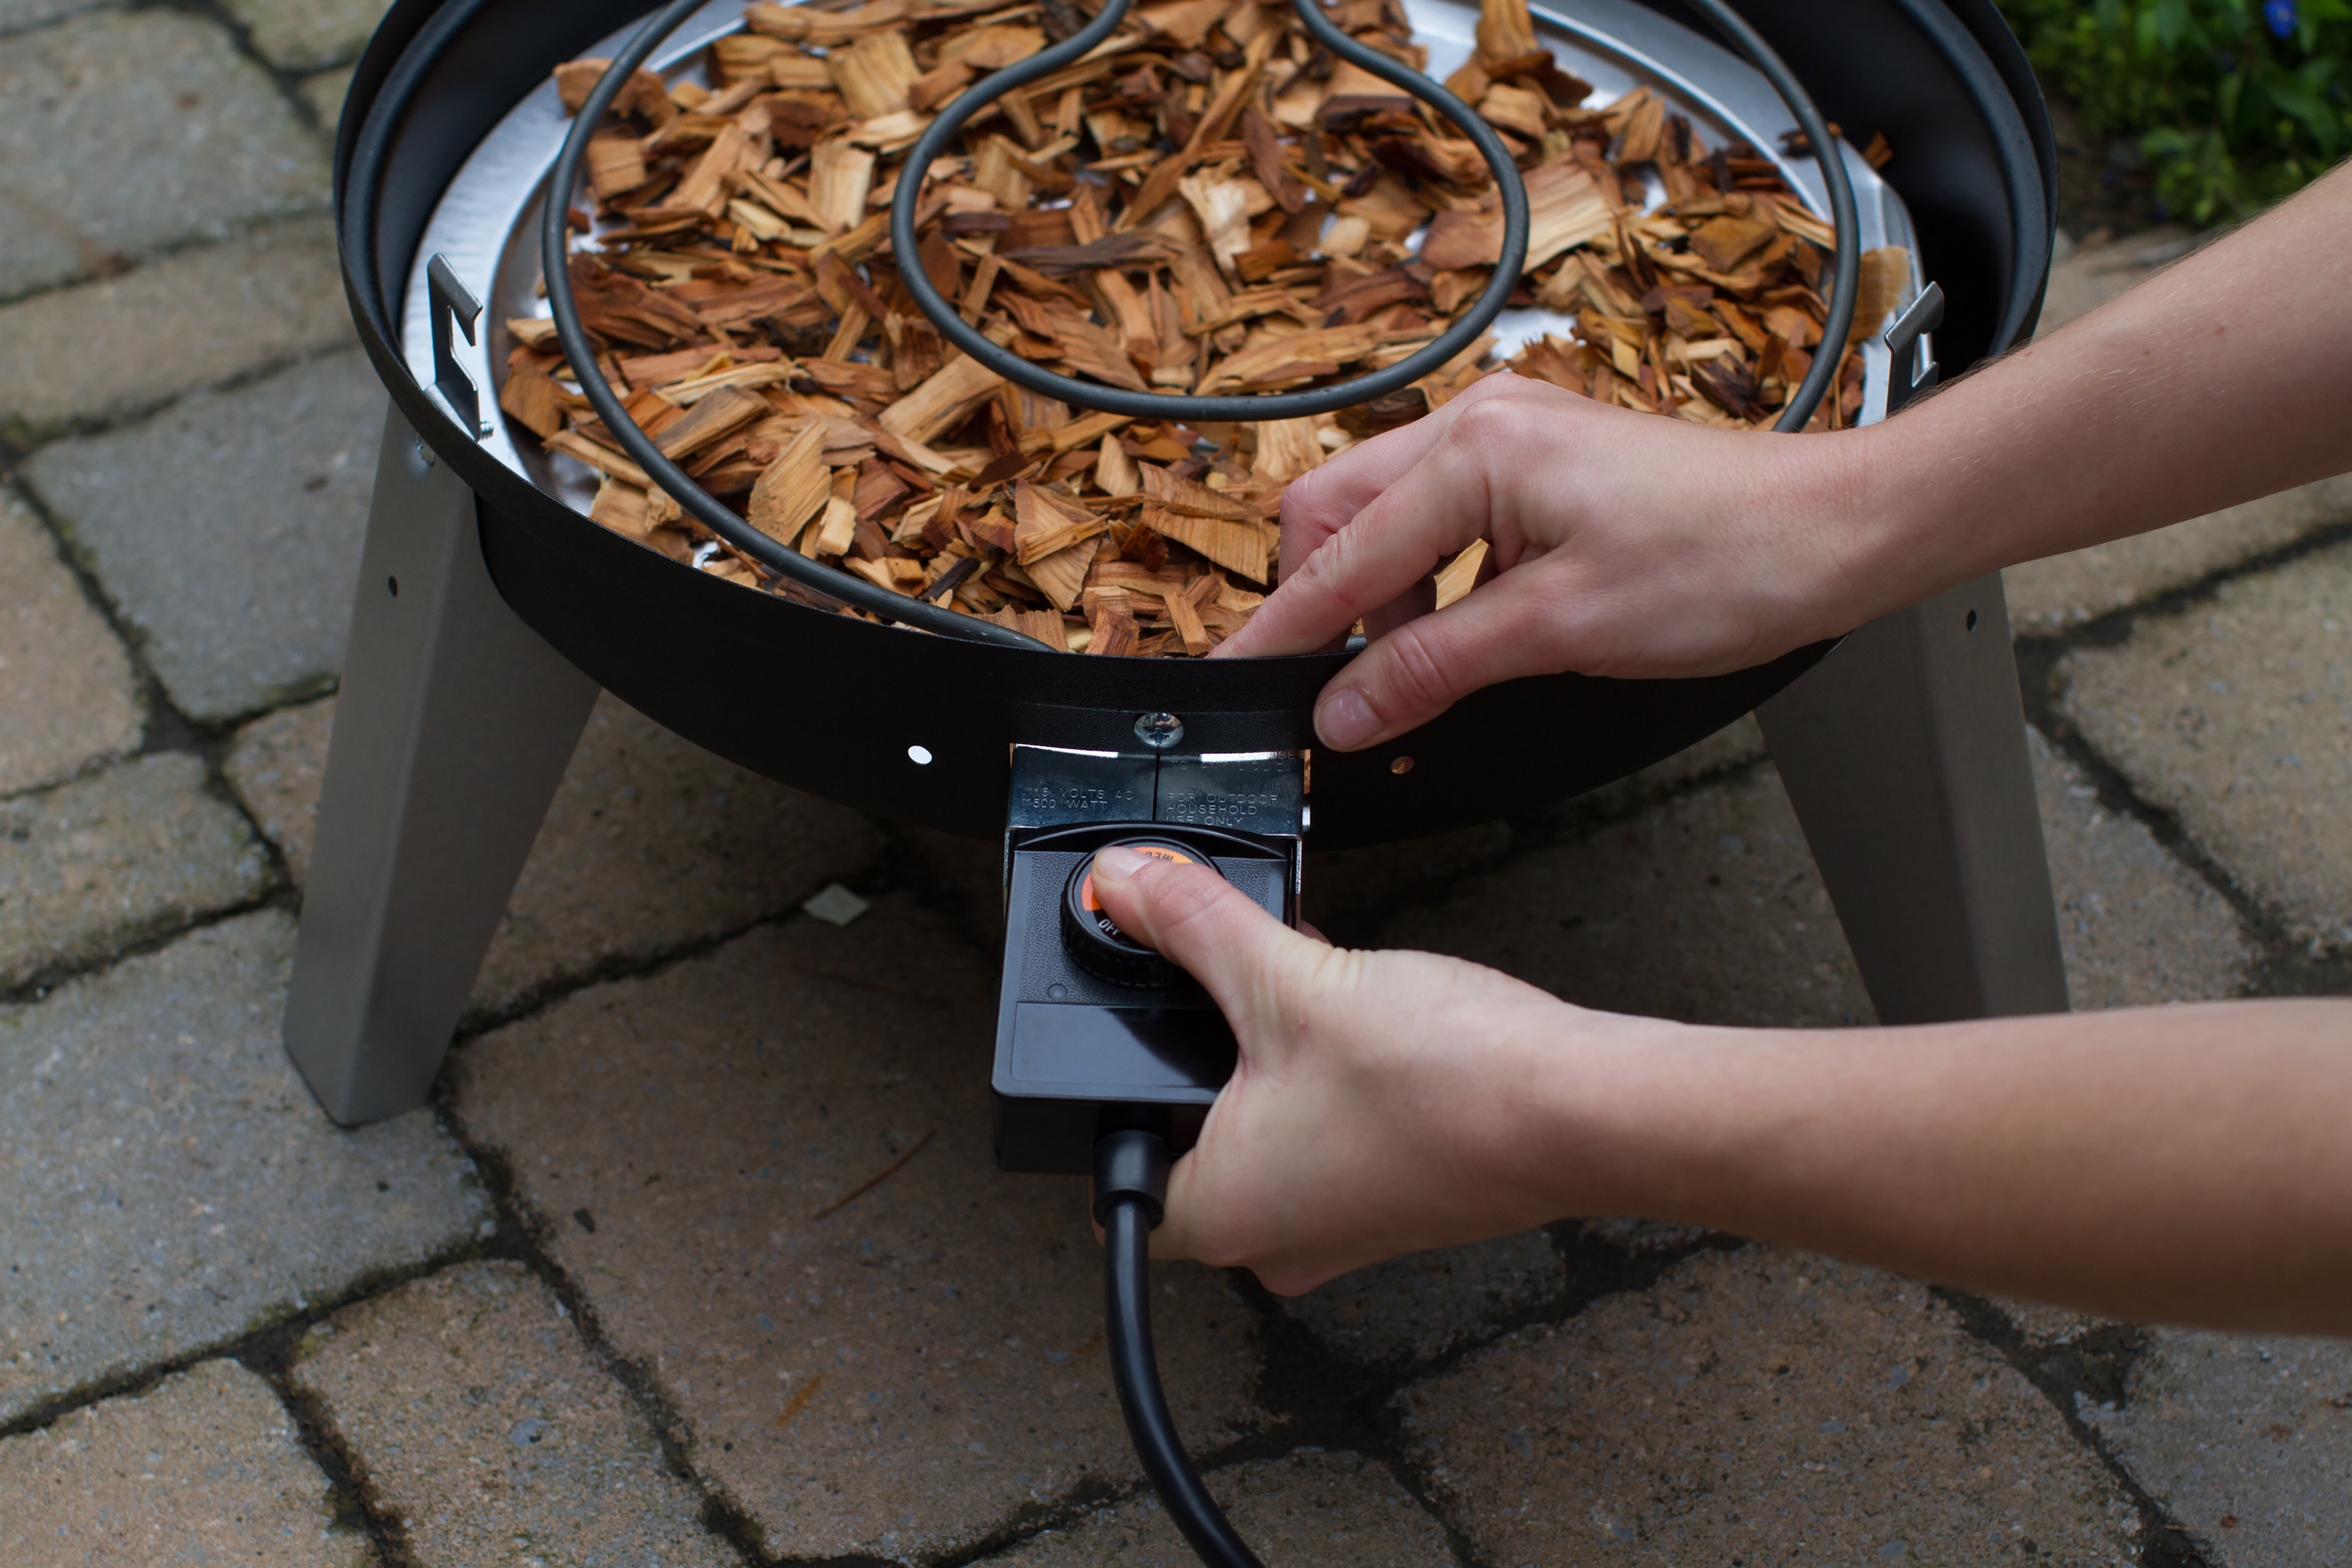 Americana 2-in-1 Electric Combination Water Smoker - image 2 of 10